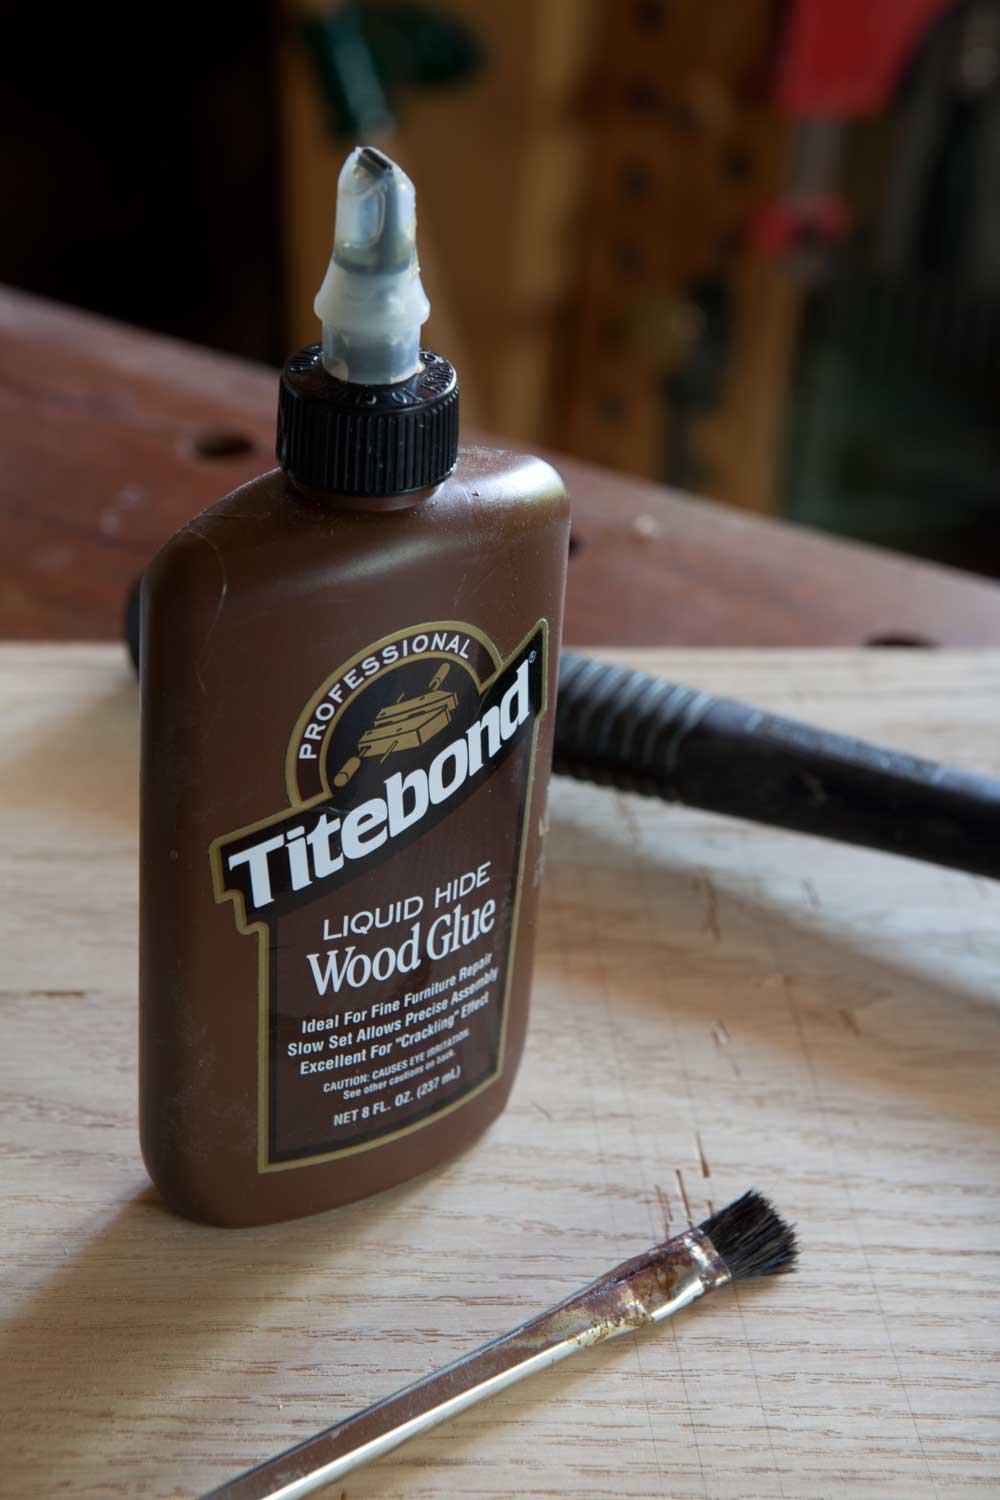 Good wood glue for woodworking Main Image